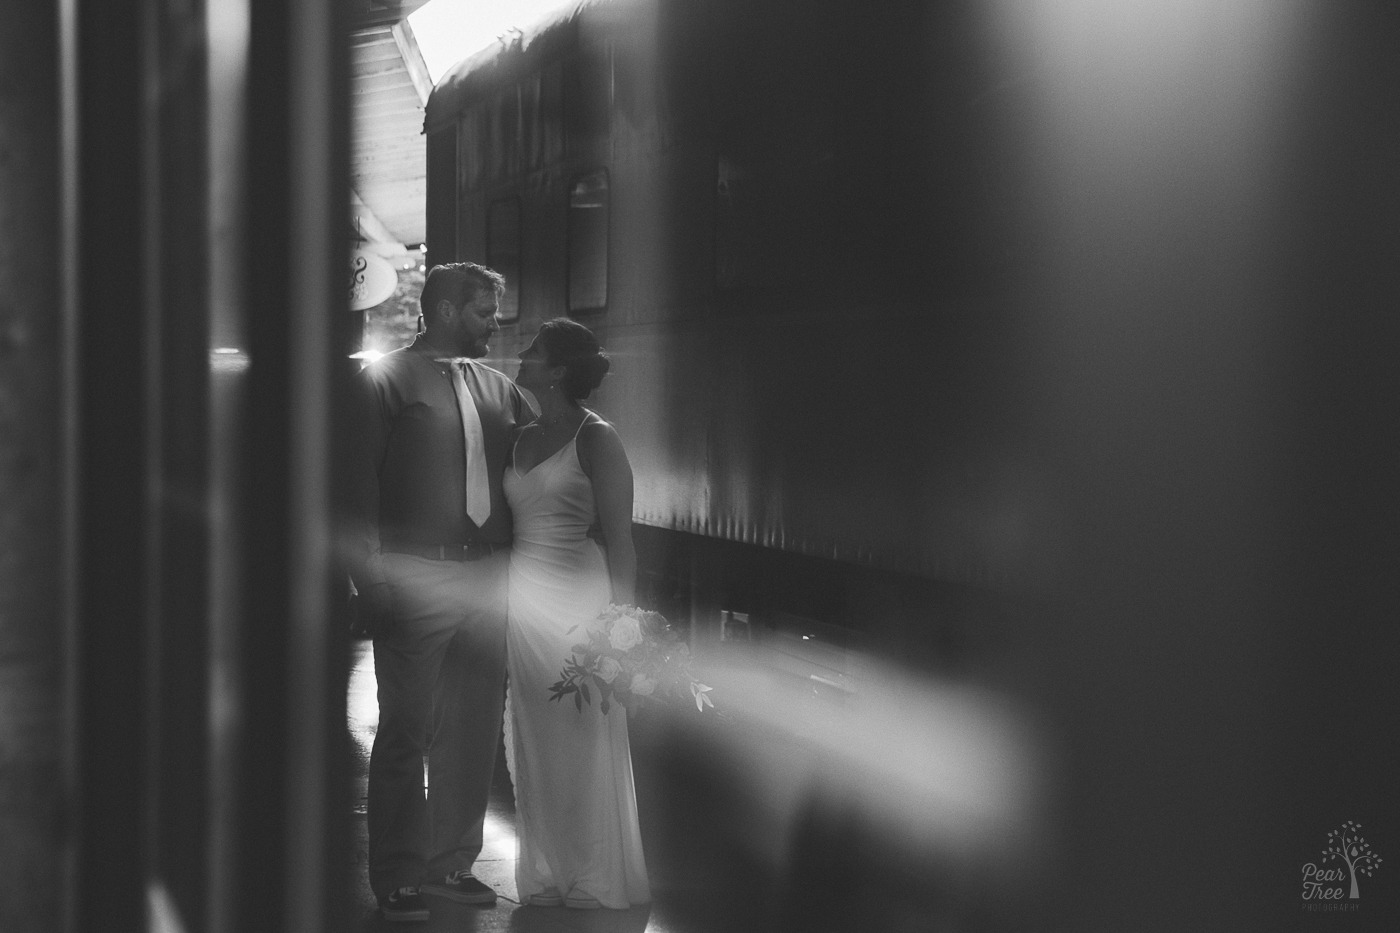 Black and white reflection of a bride and groom standing next to train cars at Chattanooga Choo Choo hotel